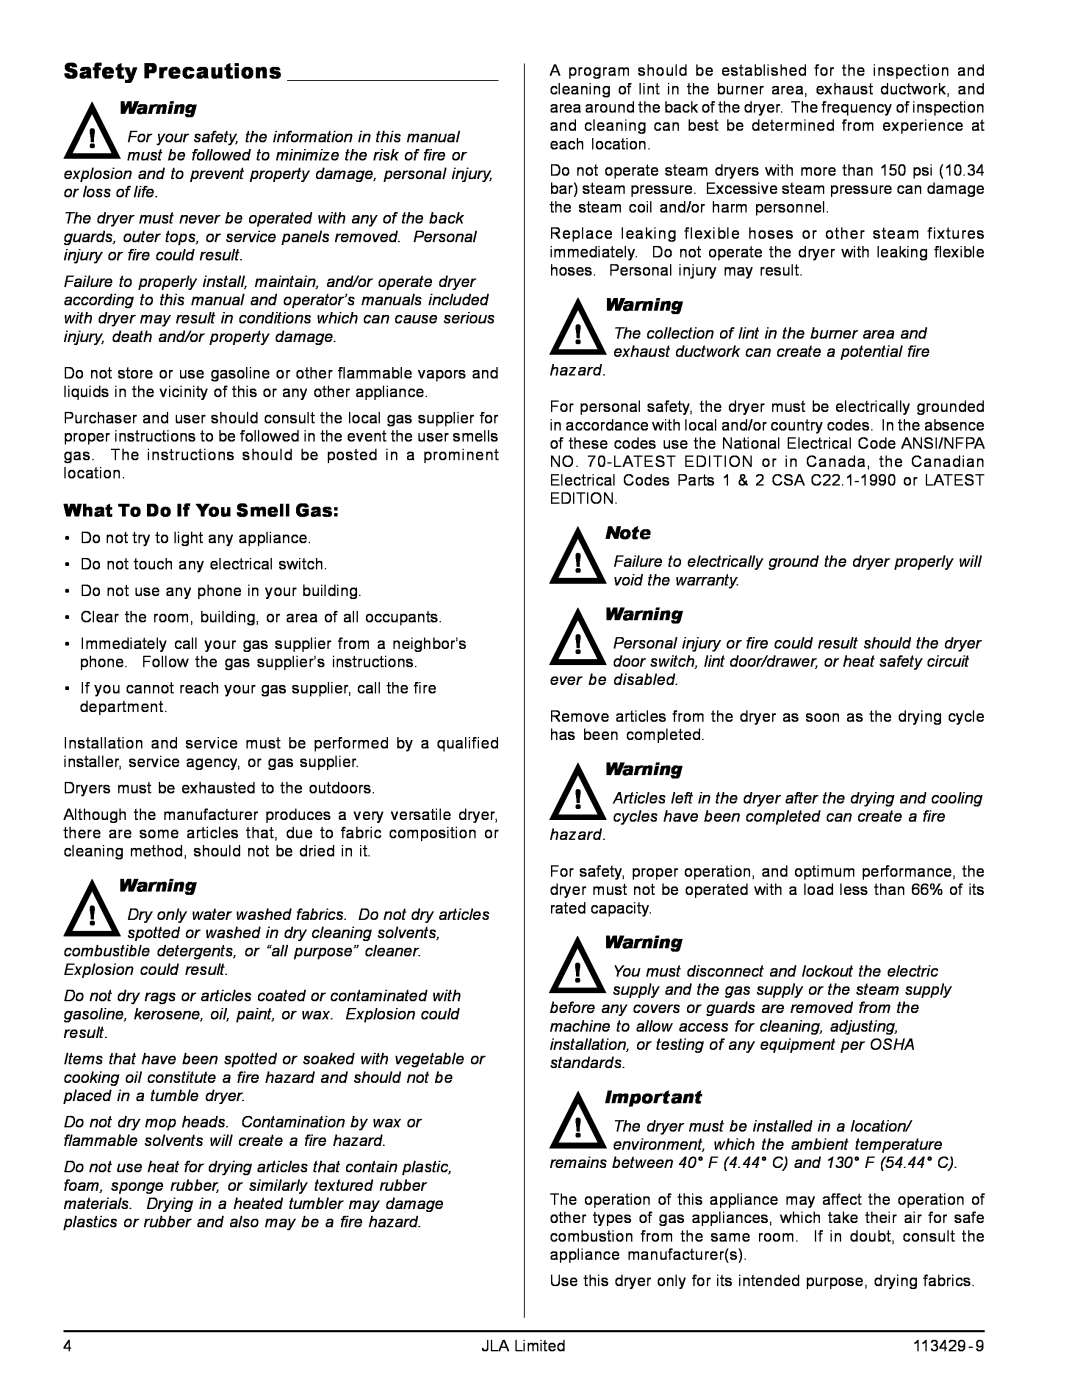 American Dryer Corp T75, T30, T20, T50 manual Safety Precautions, What To Do If You Smell Gas 